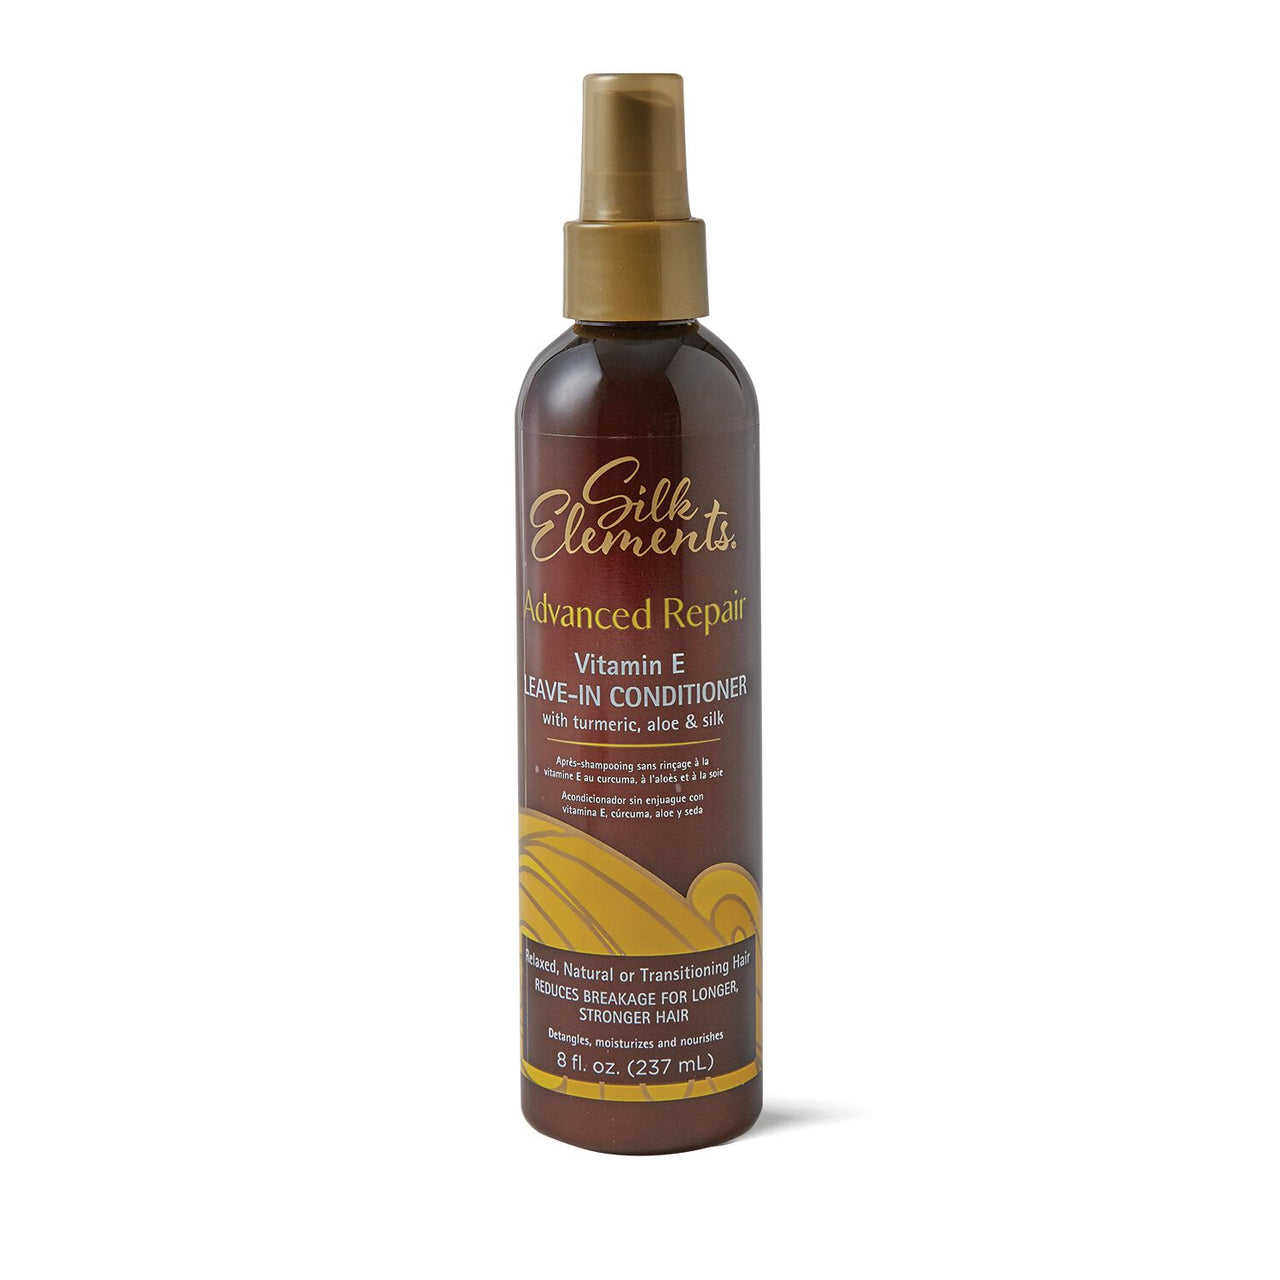 Advanced Repair  by   Silk Elements Advanced Repair Leave-In Conditioner